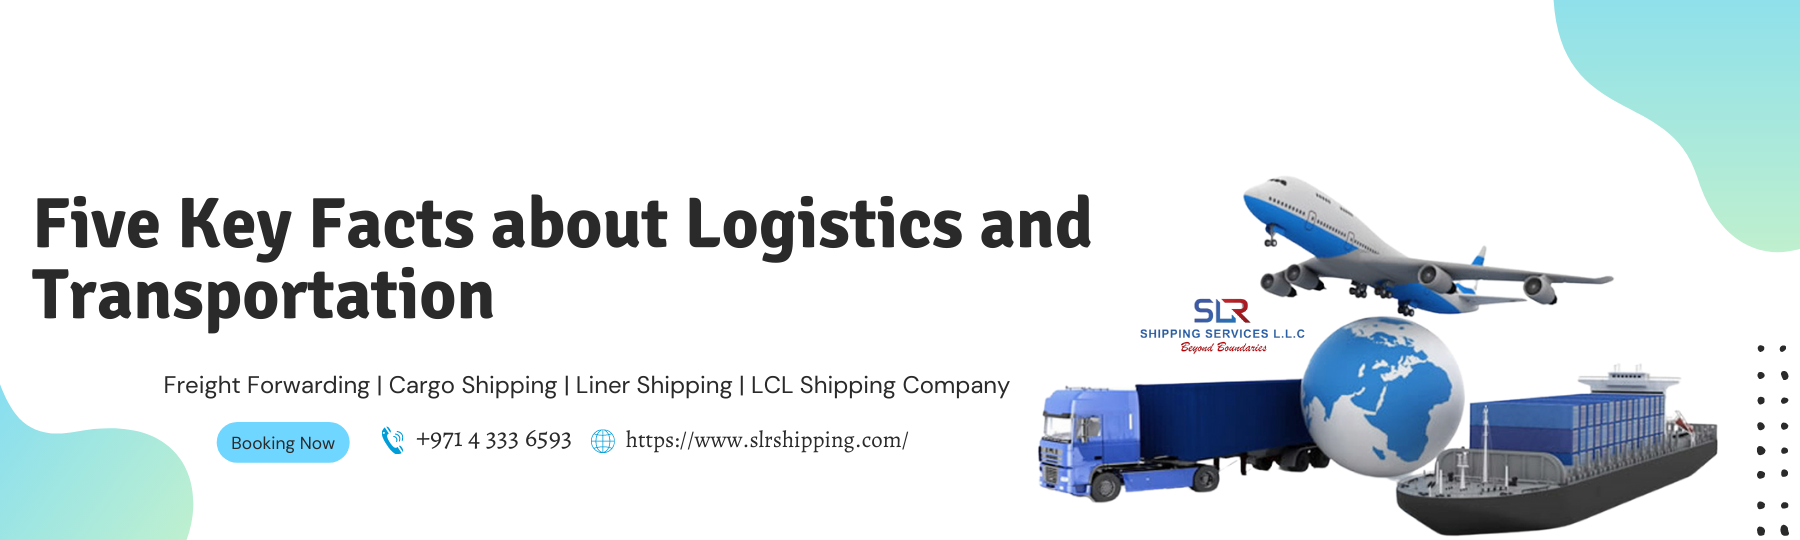 Five Key Facts about Logistics and Transportation